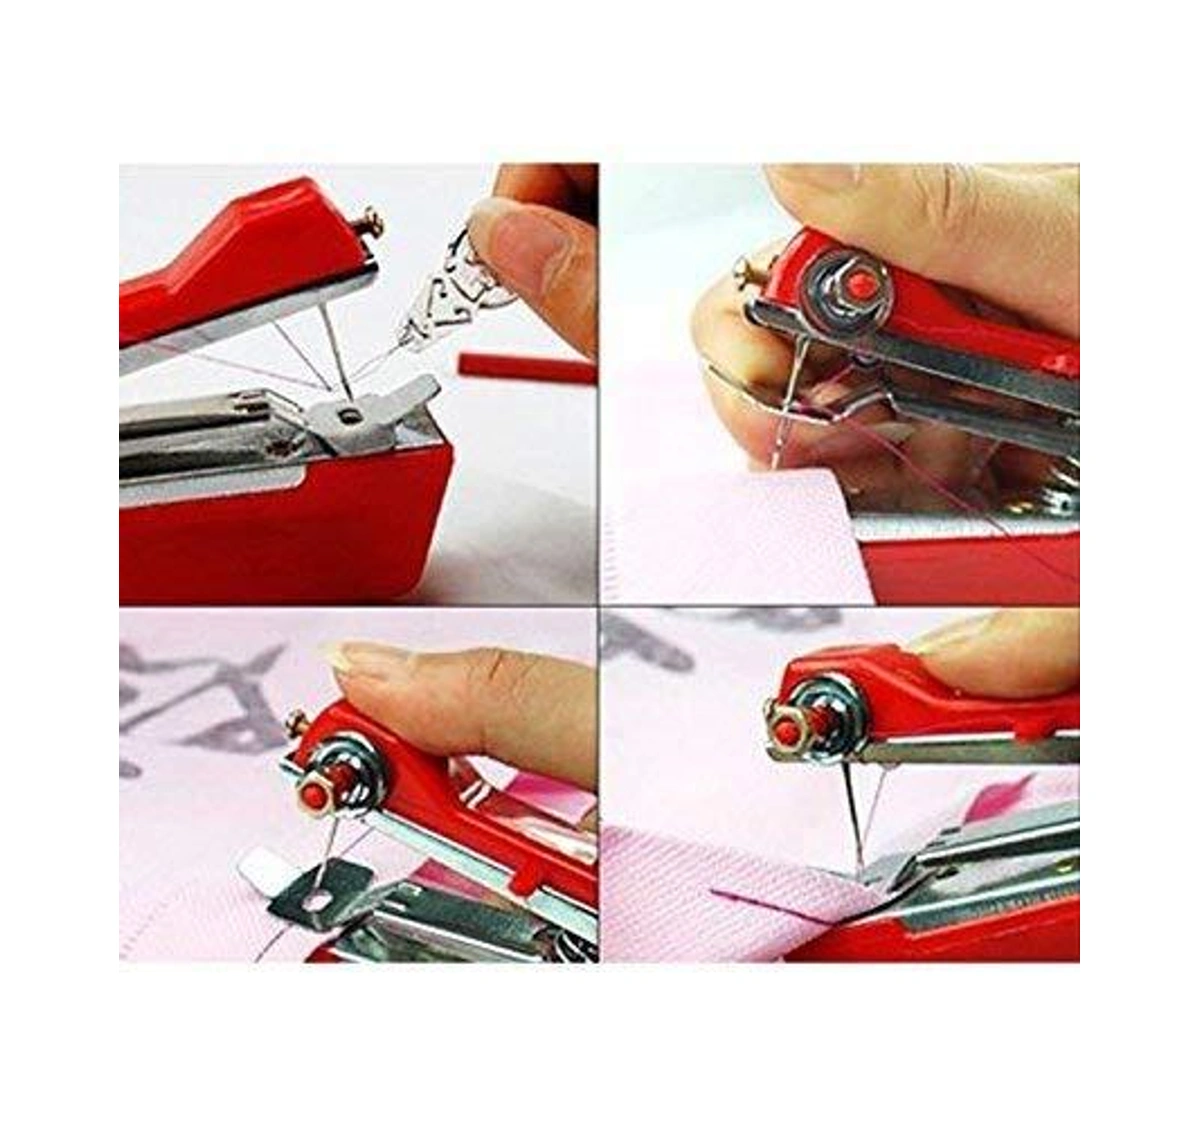 Handheld Sewing Machine, Hand Held Sewing Device India